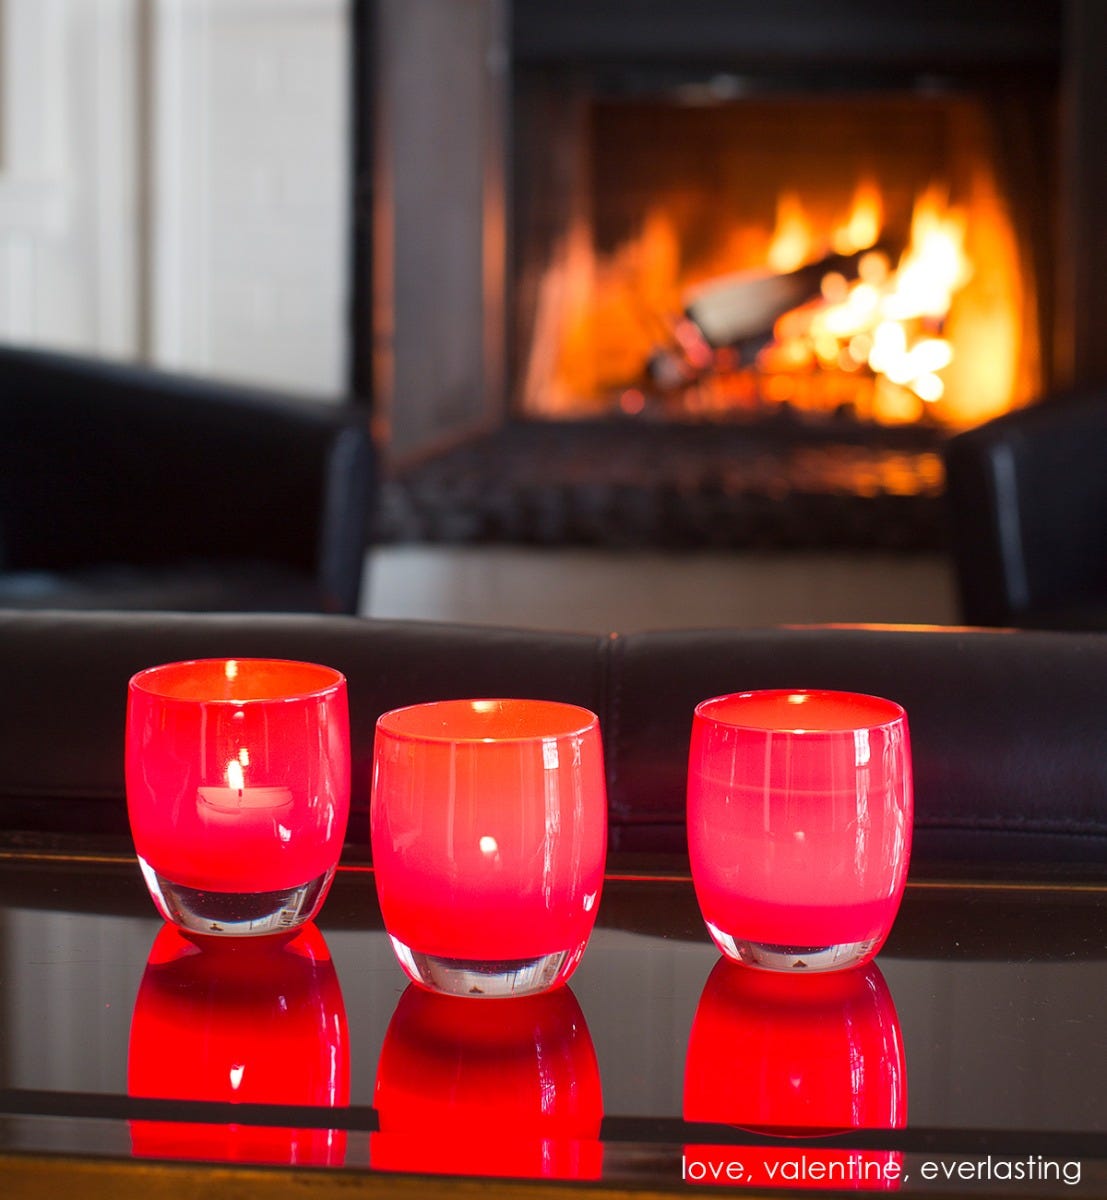 valentine red hand-blown glass votive candle holder. Paired with love and everlasting